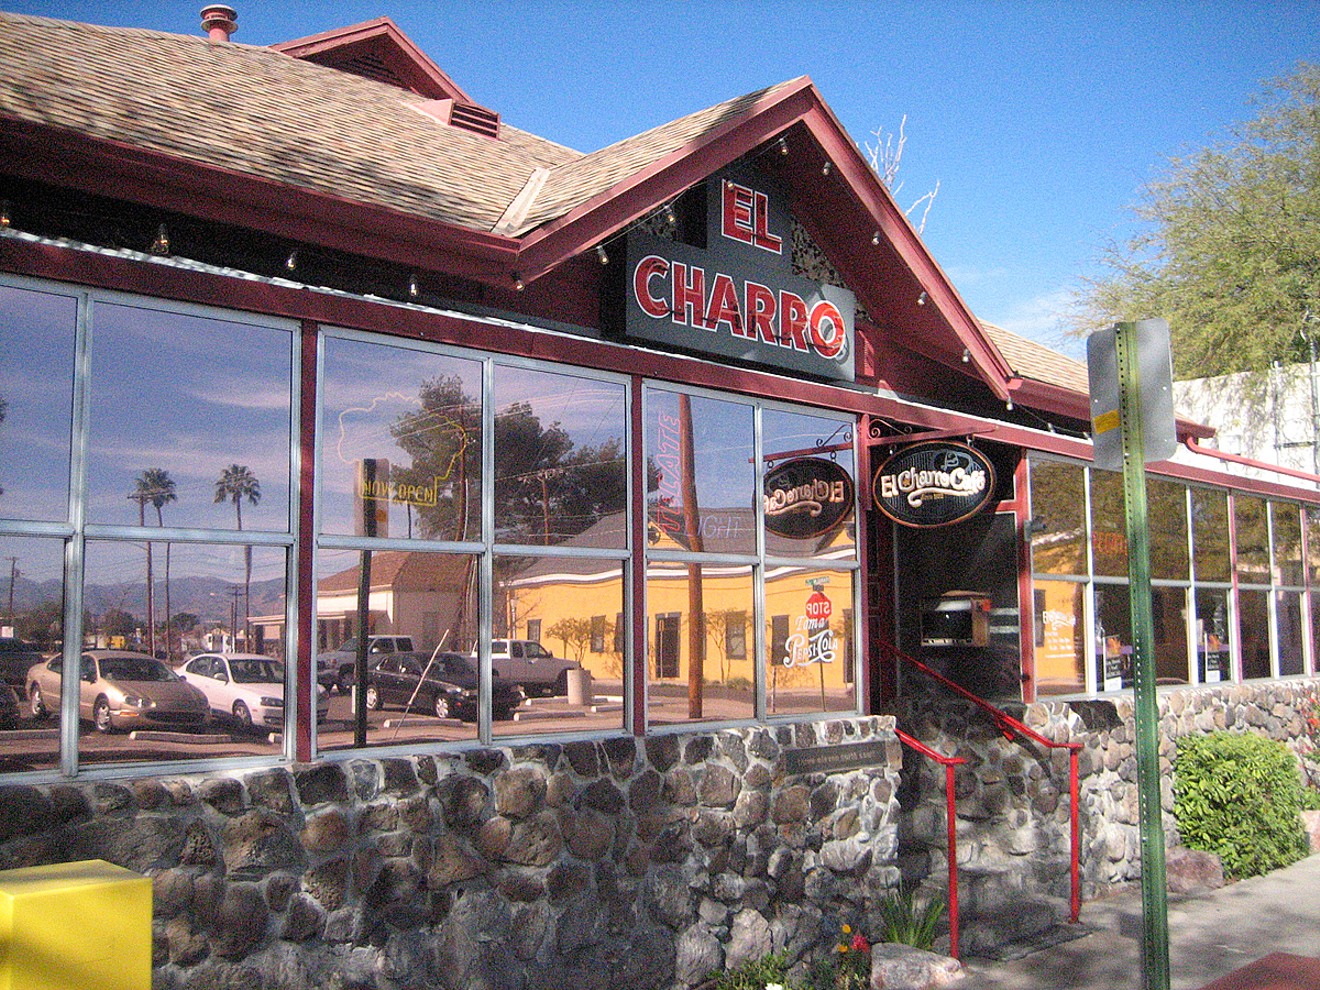 El Charro's original location is listed in the National Register of Historic Places.